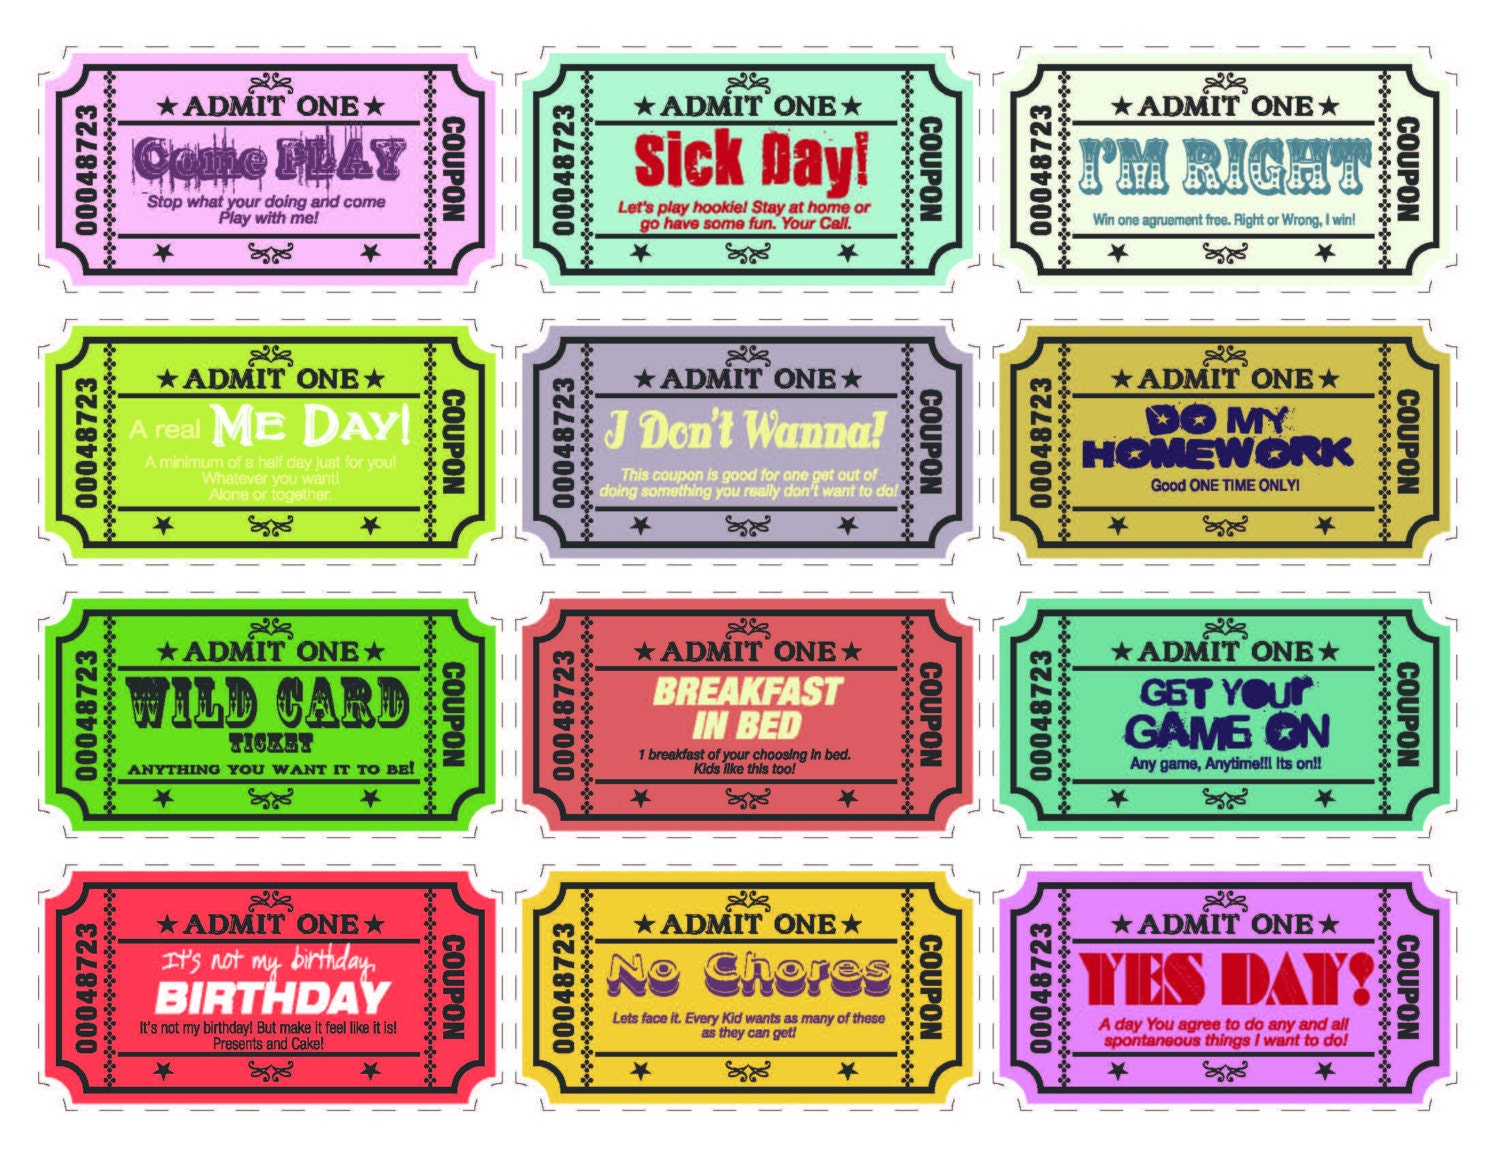 printable-kids-coupons-with-extra-blank-coupons-24-by-tvlbdesigns